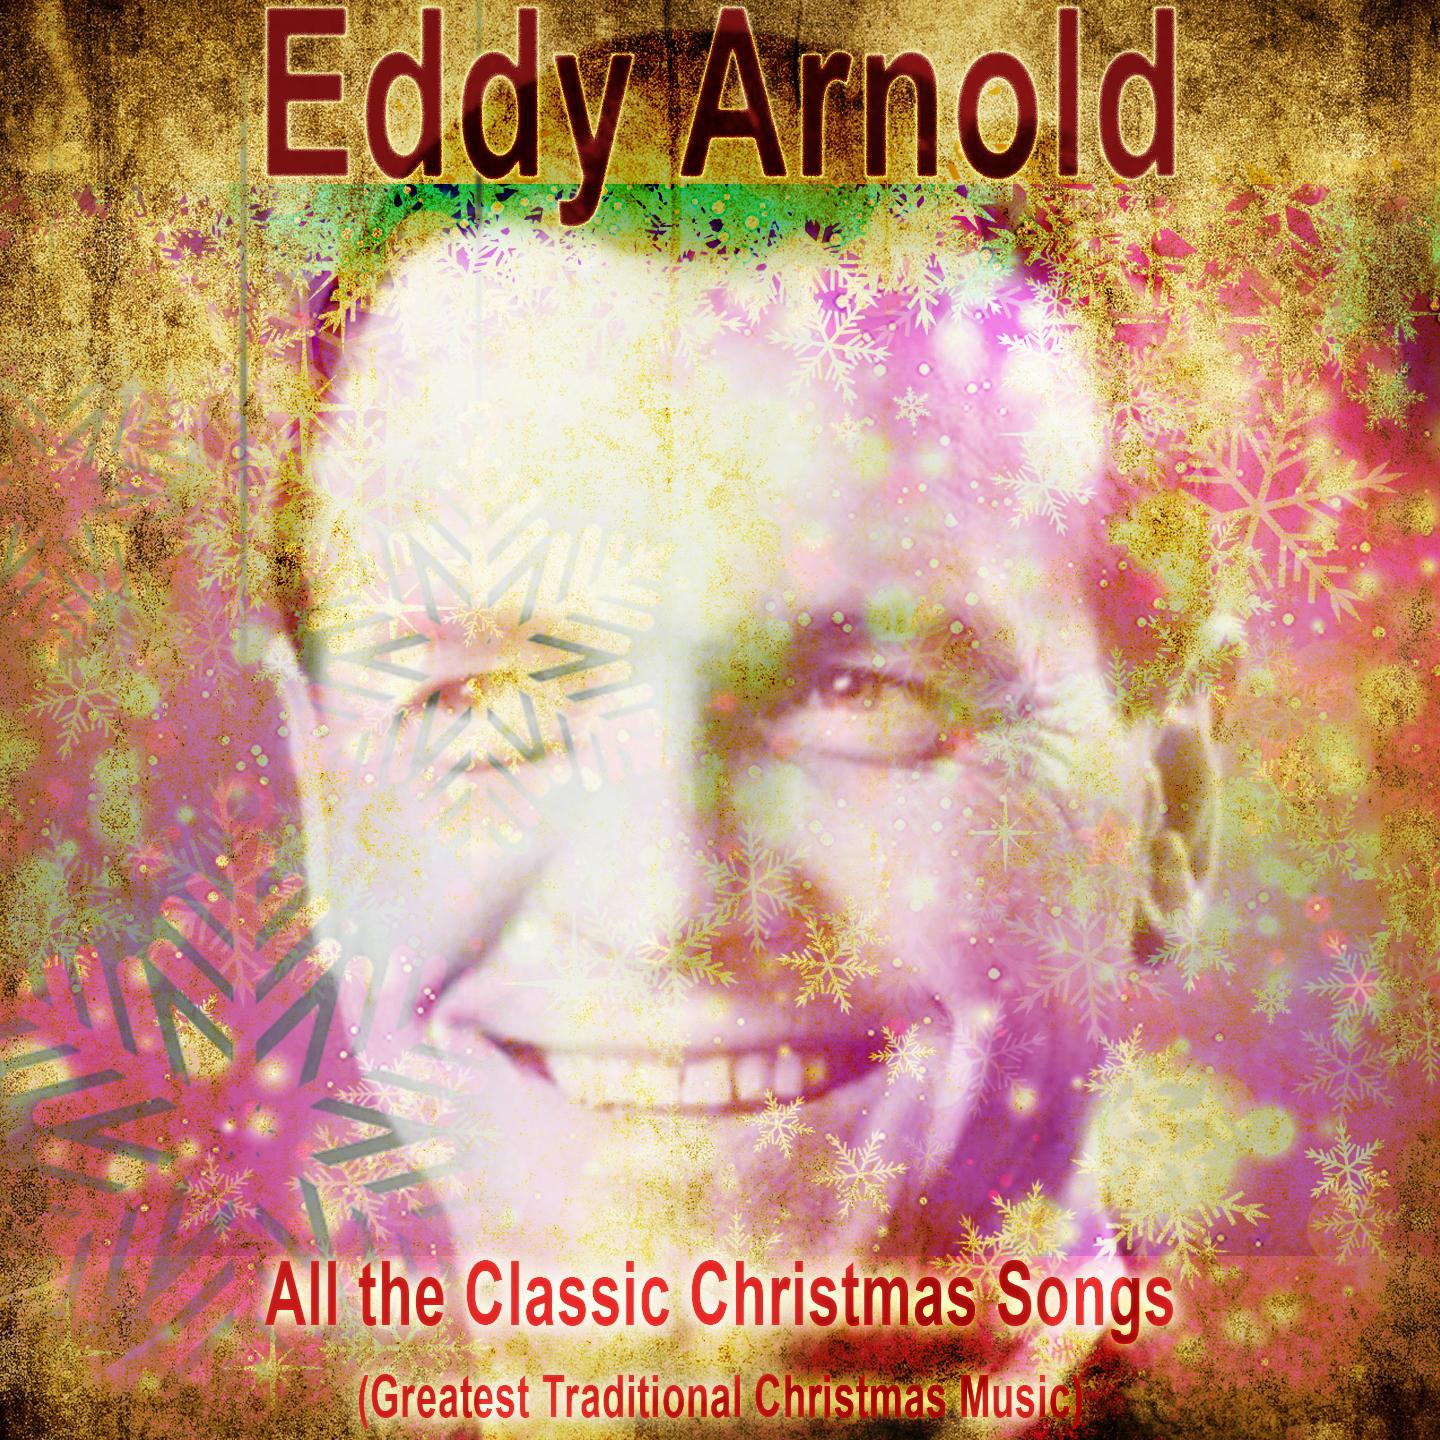 All the Classic Christmas Songs (Greatest Traditional Christmas Music)